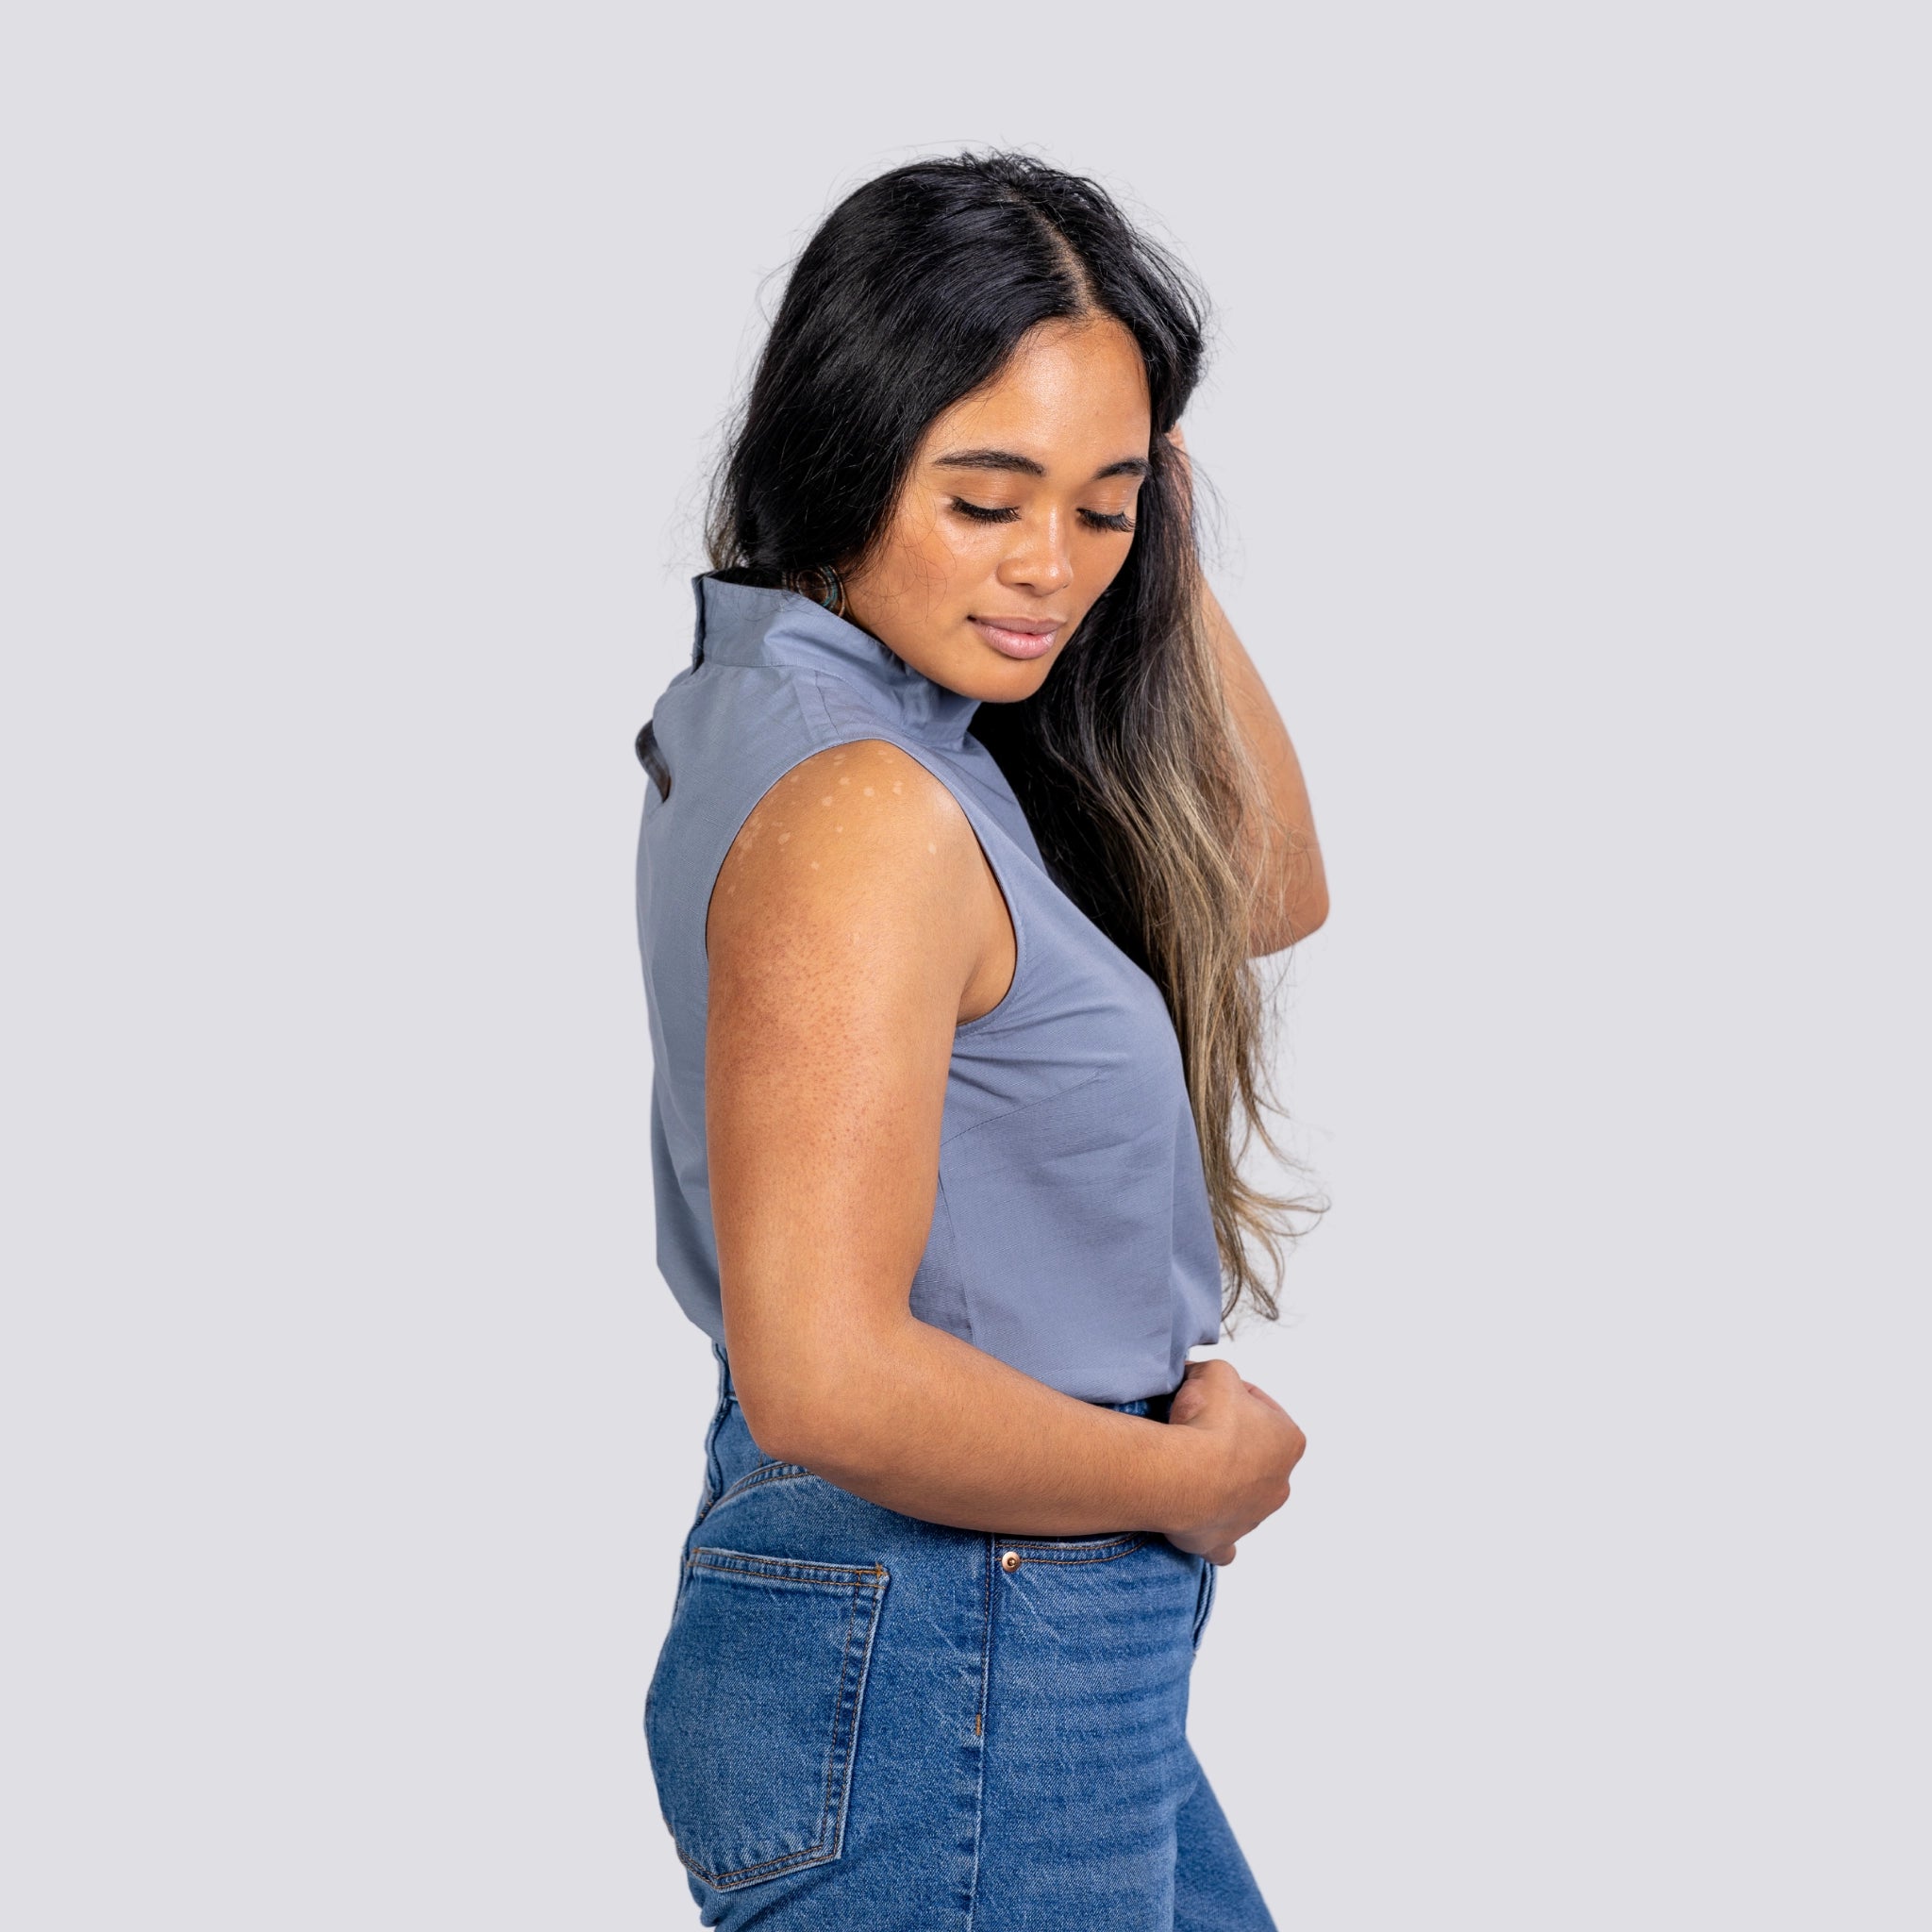 A woman in a Karee Linen Sleeveless Top in Classic Grey and jeans stands with her side to the camera, looking down and smiling slightly.